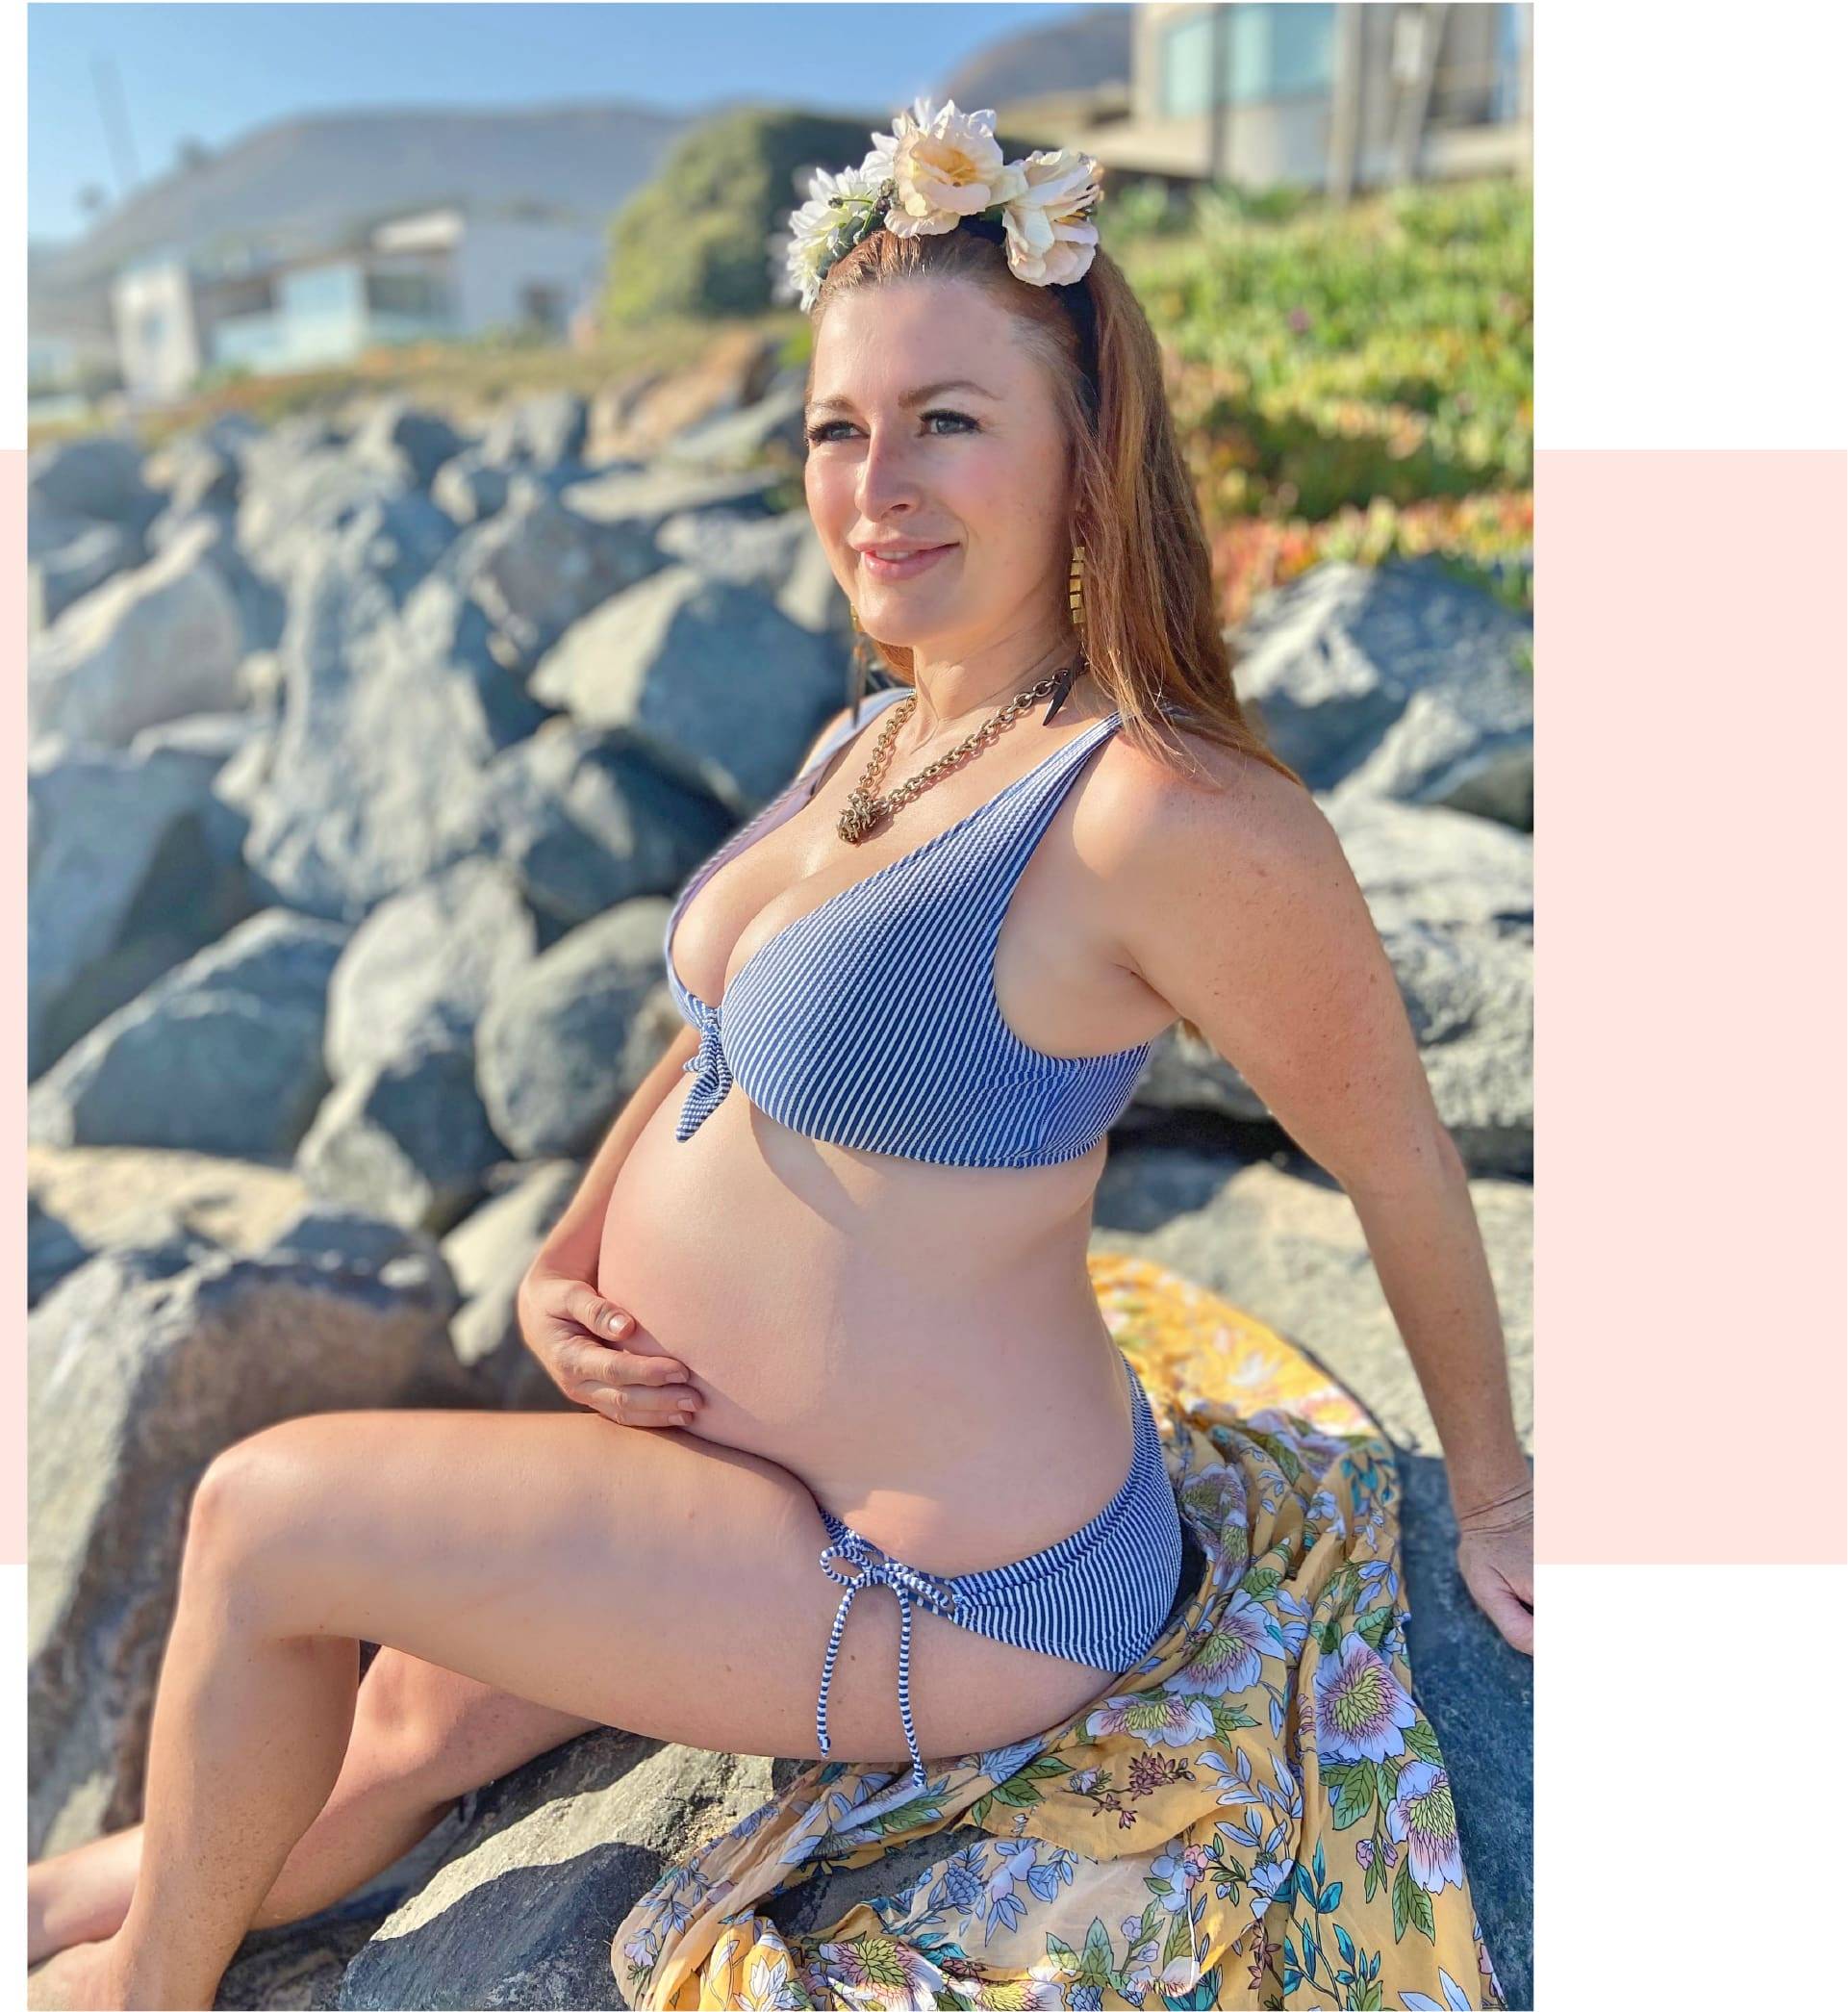 Rachel Reilly is wearing SKYE's Sophia top and Angelina bottom from the Saint-Tropez collection, and the Nelly kimono from the Penelope collectoon.